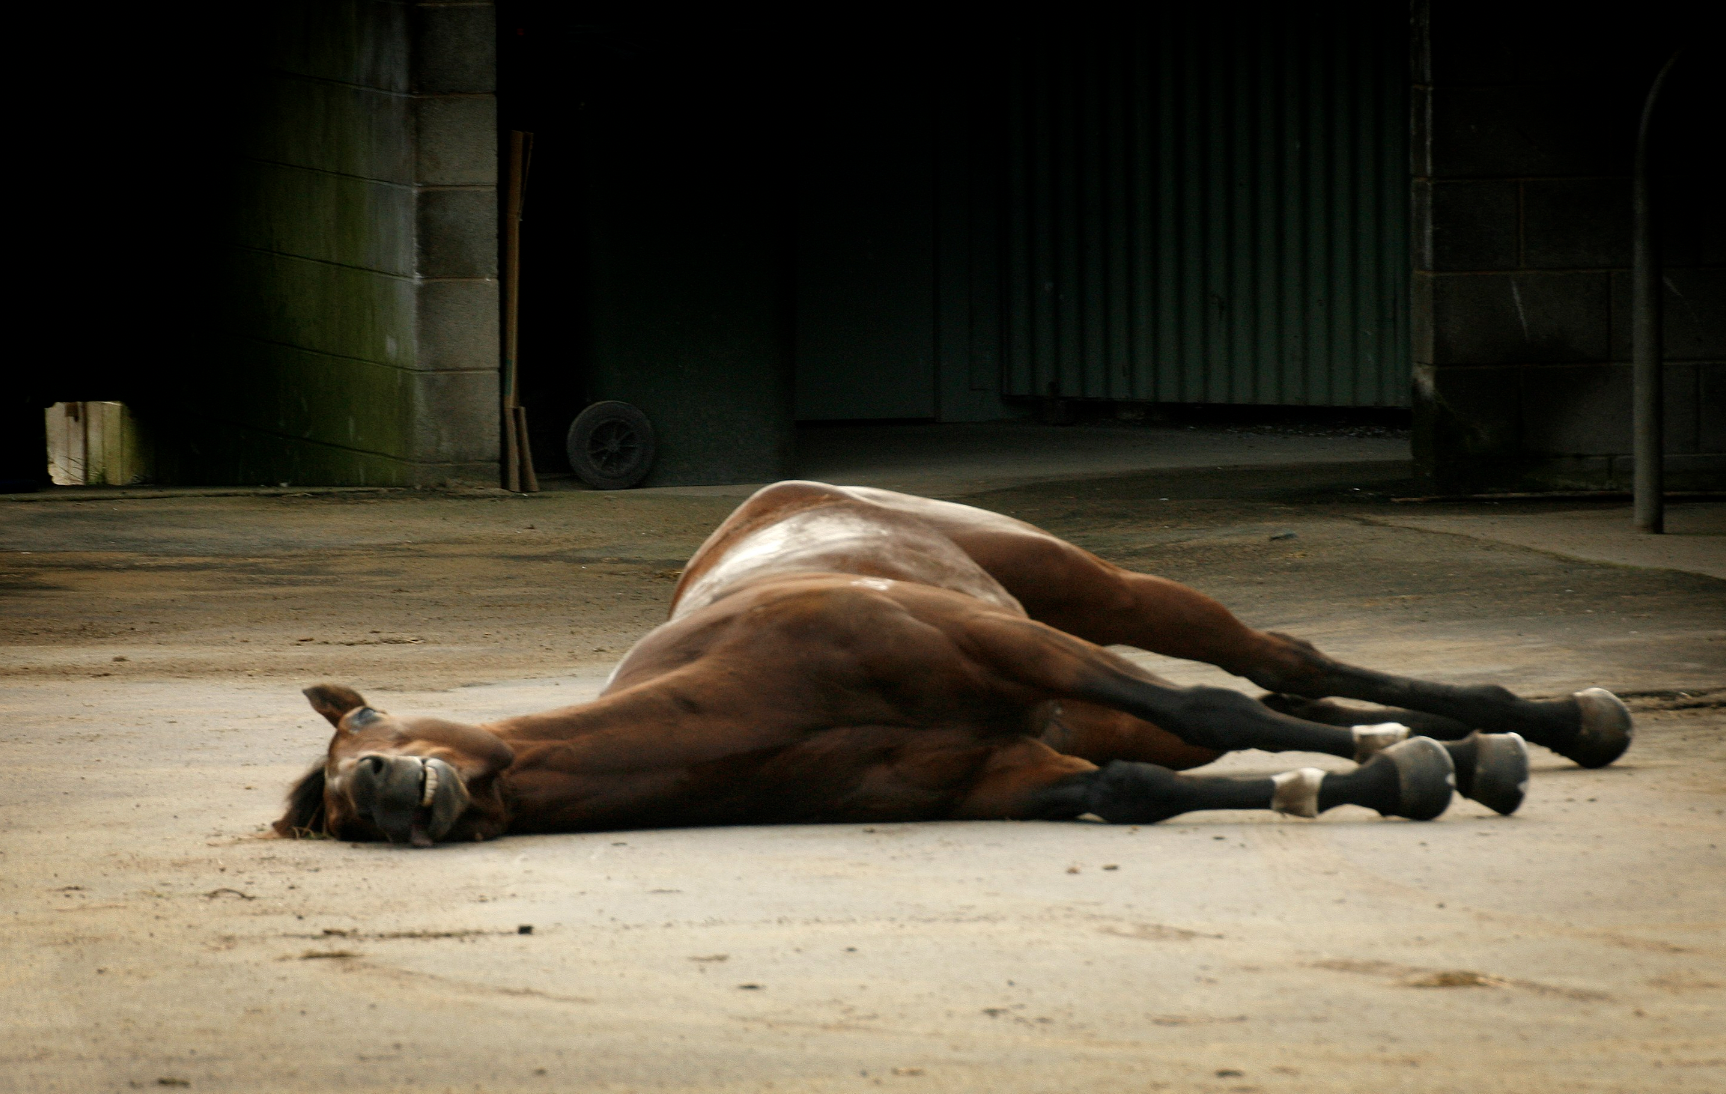 Pride Of Westbury fell during a jumps race in Warrnambool Victoria in 2009. He was subsequently killed, and his lifeless body was left on the concrete behind the racetrack out of view of racegoers. 